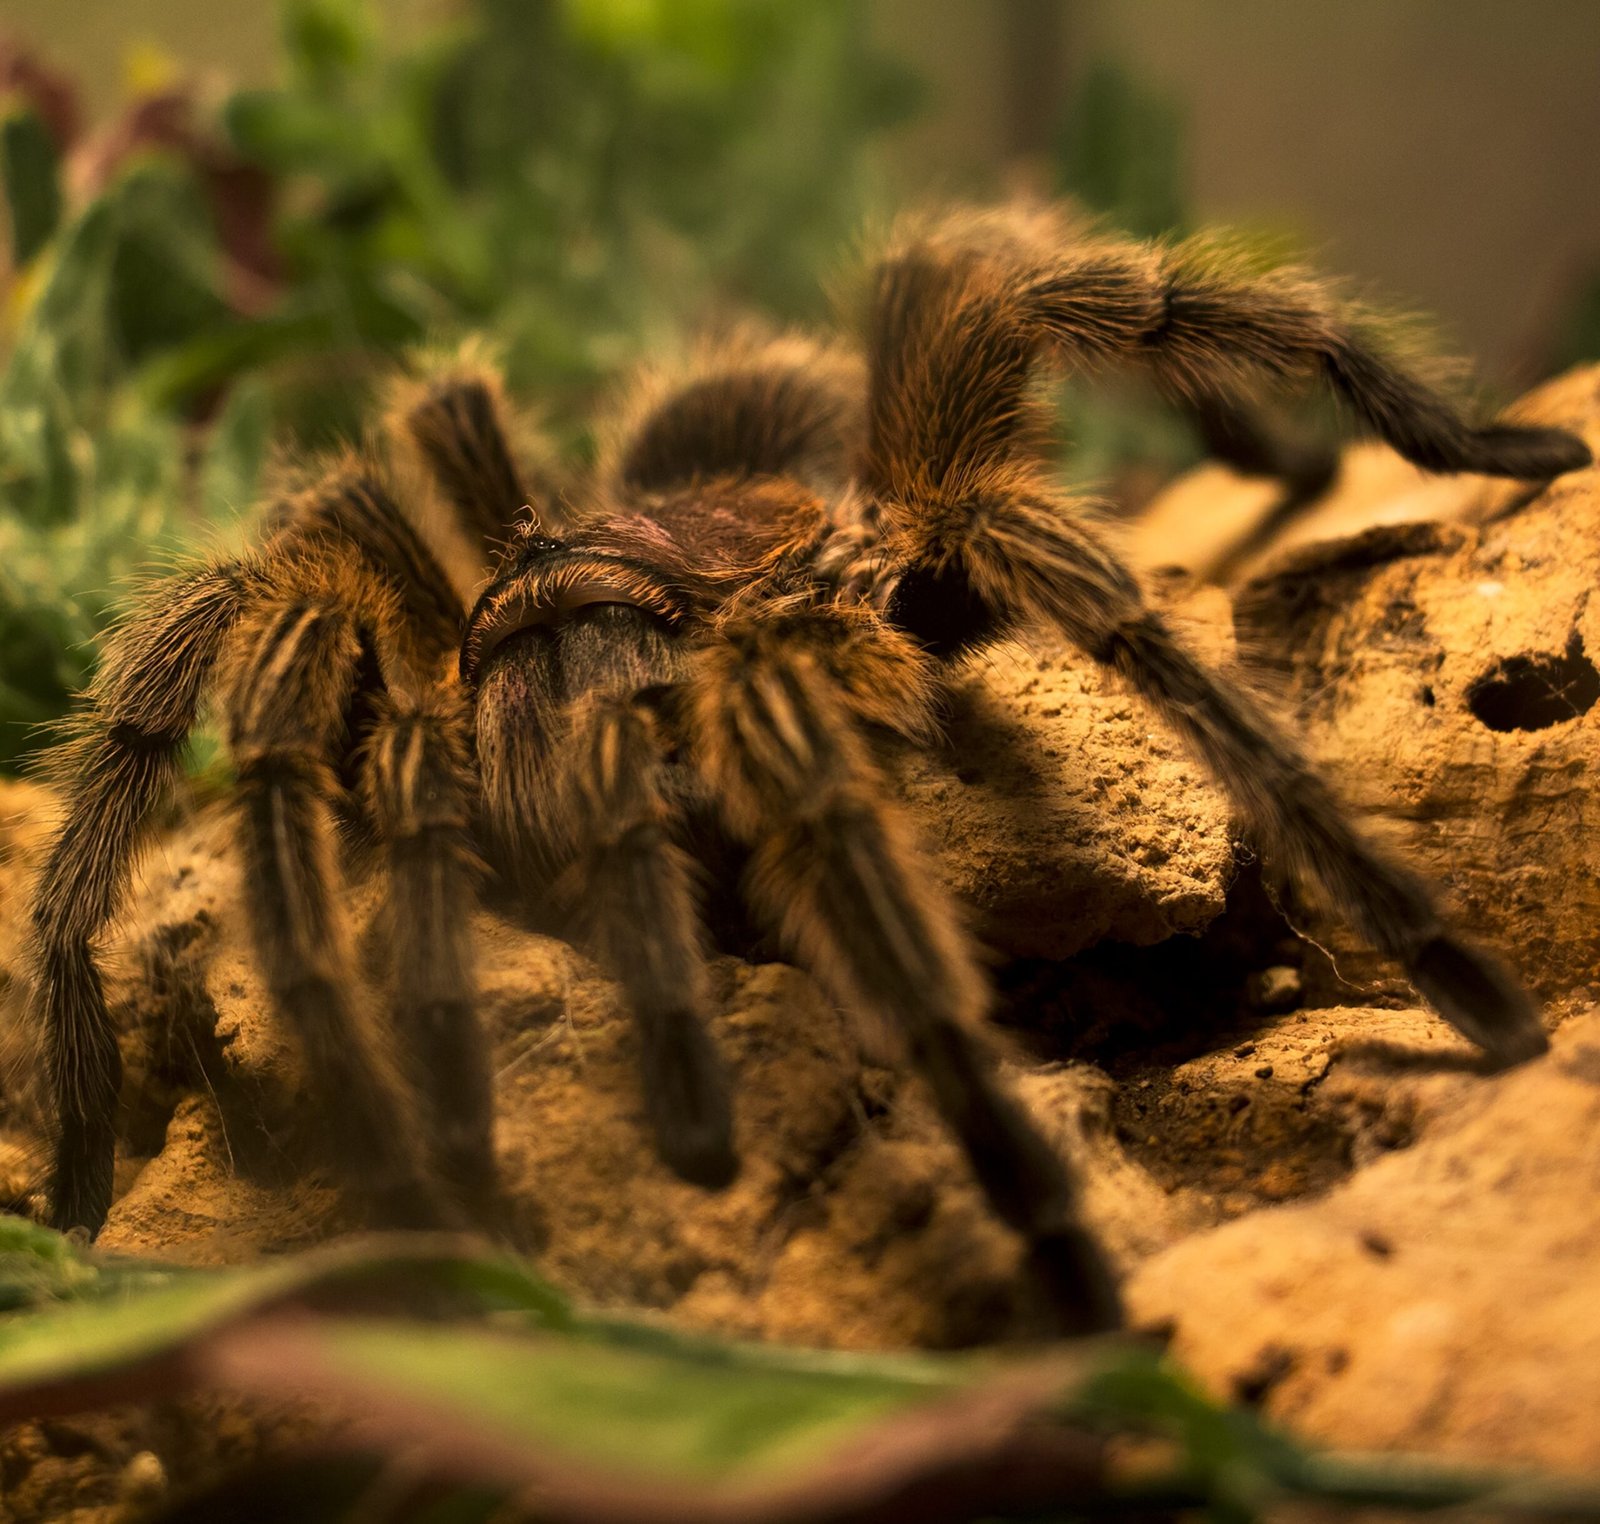 What Is The Natural Range Of The Strikingly Marked Brazilian Pink Bloom Tarantula?